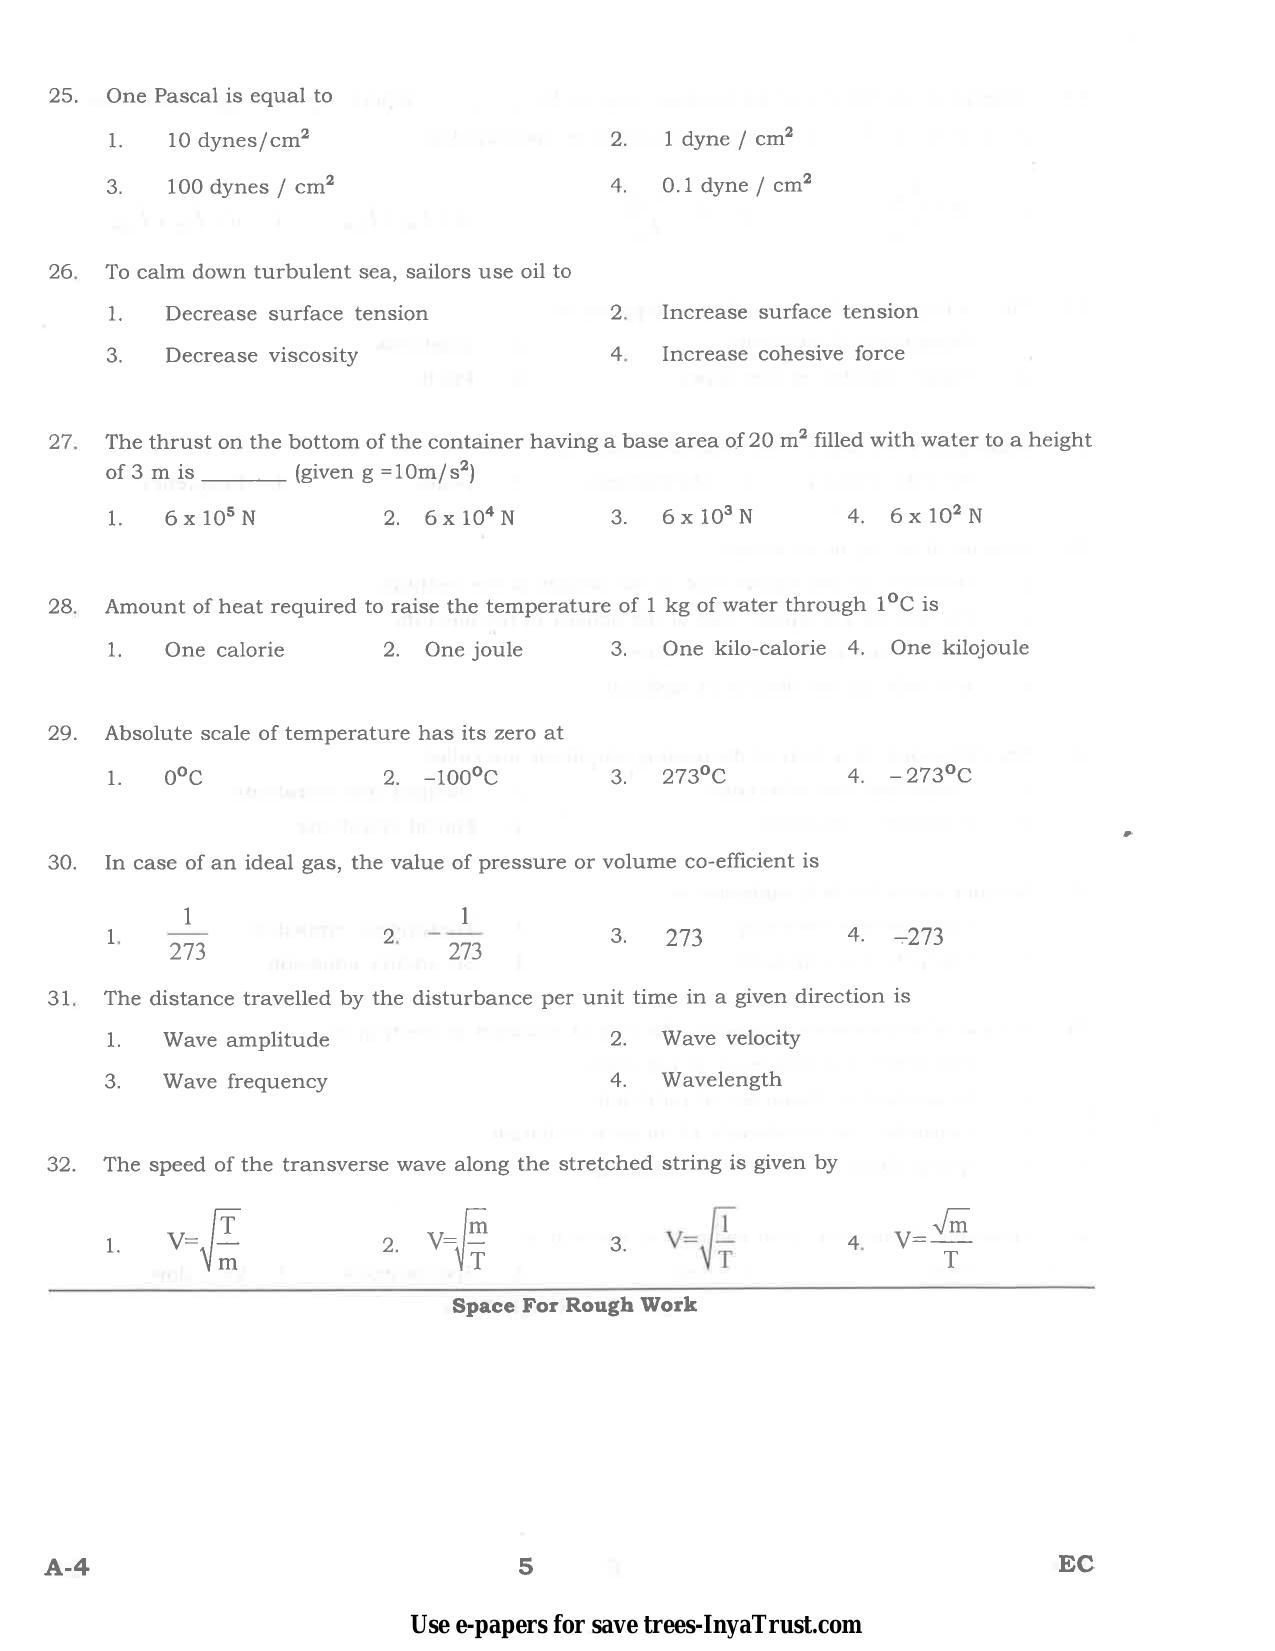 Karnataka Diploma CET- 2015 Electronics and Communication Engineering Question Paper - Page 5